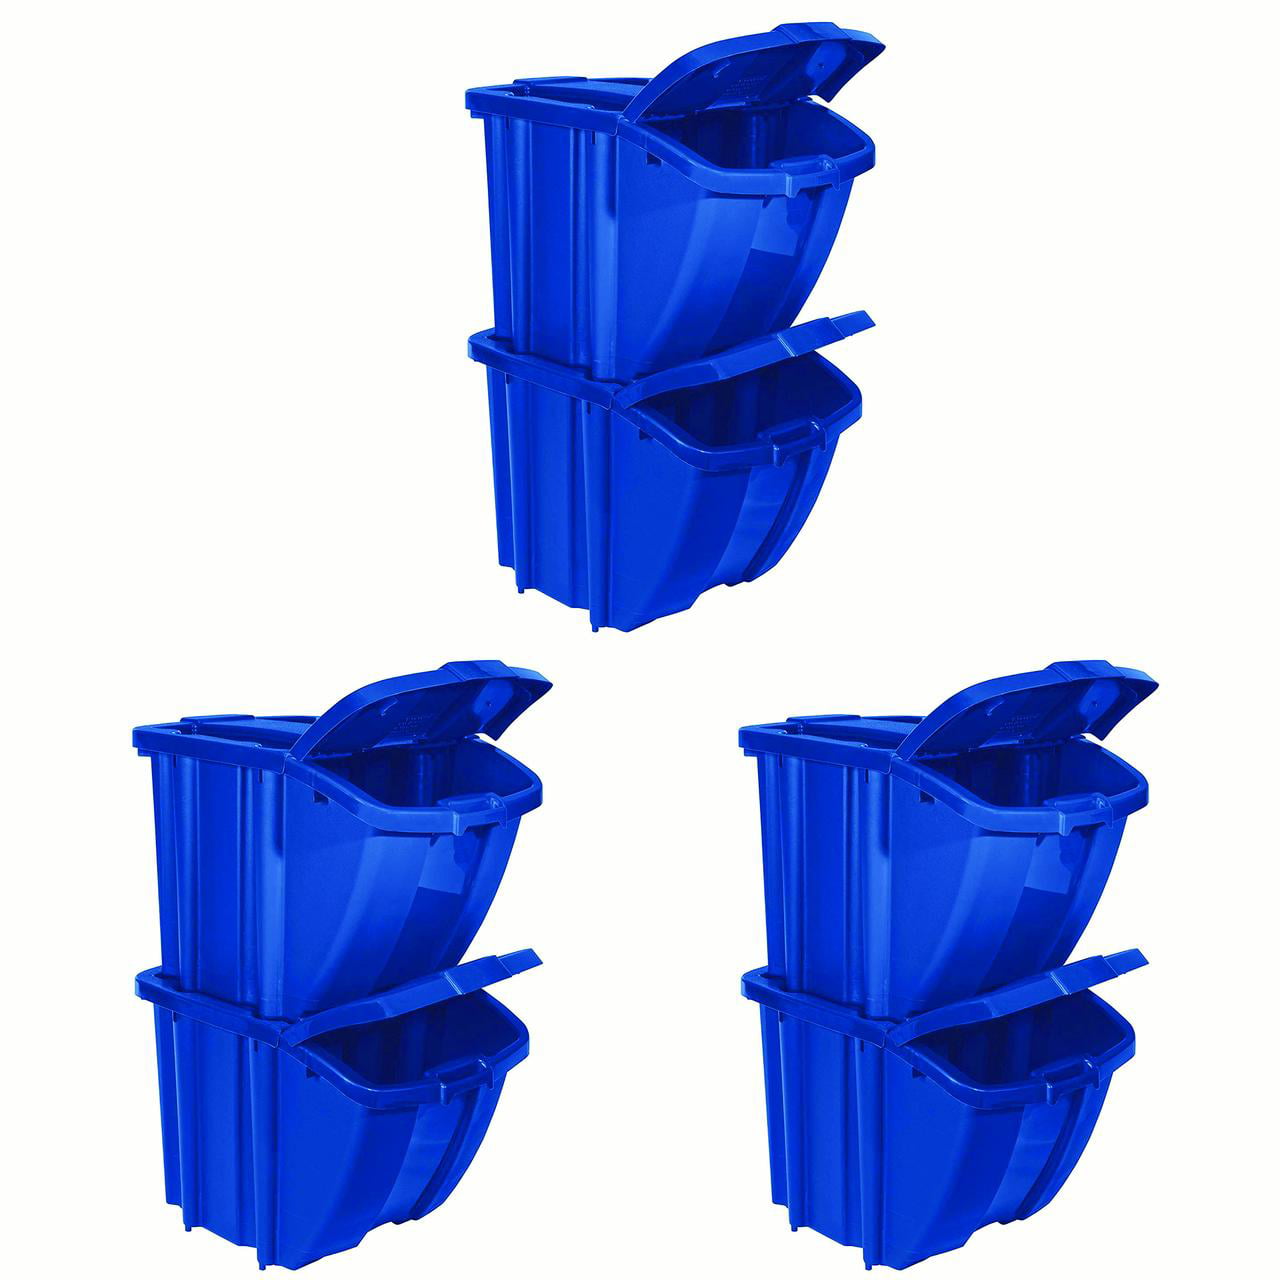 Rubbermaid 18 Gallon Blue Stacking Recycle Bin